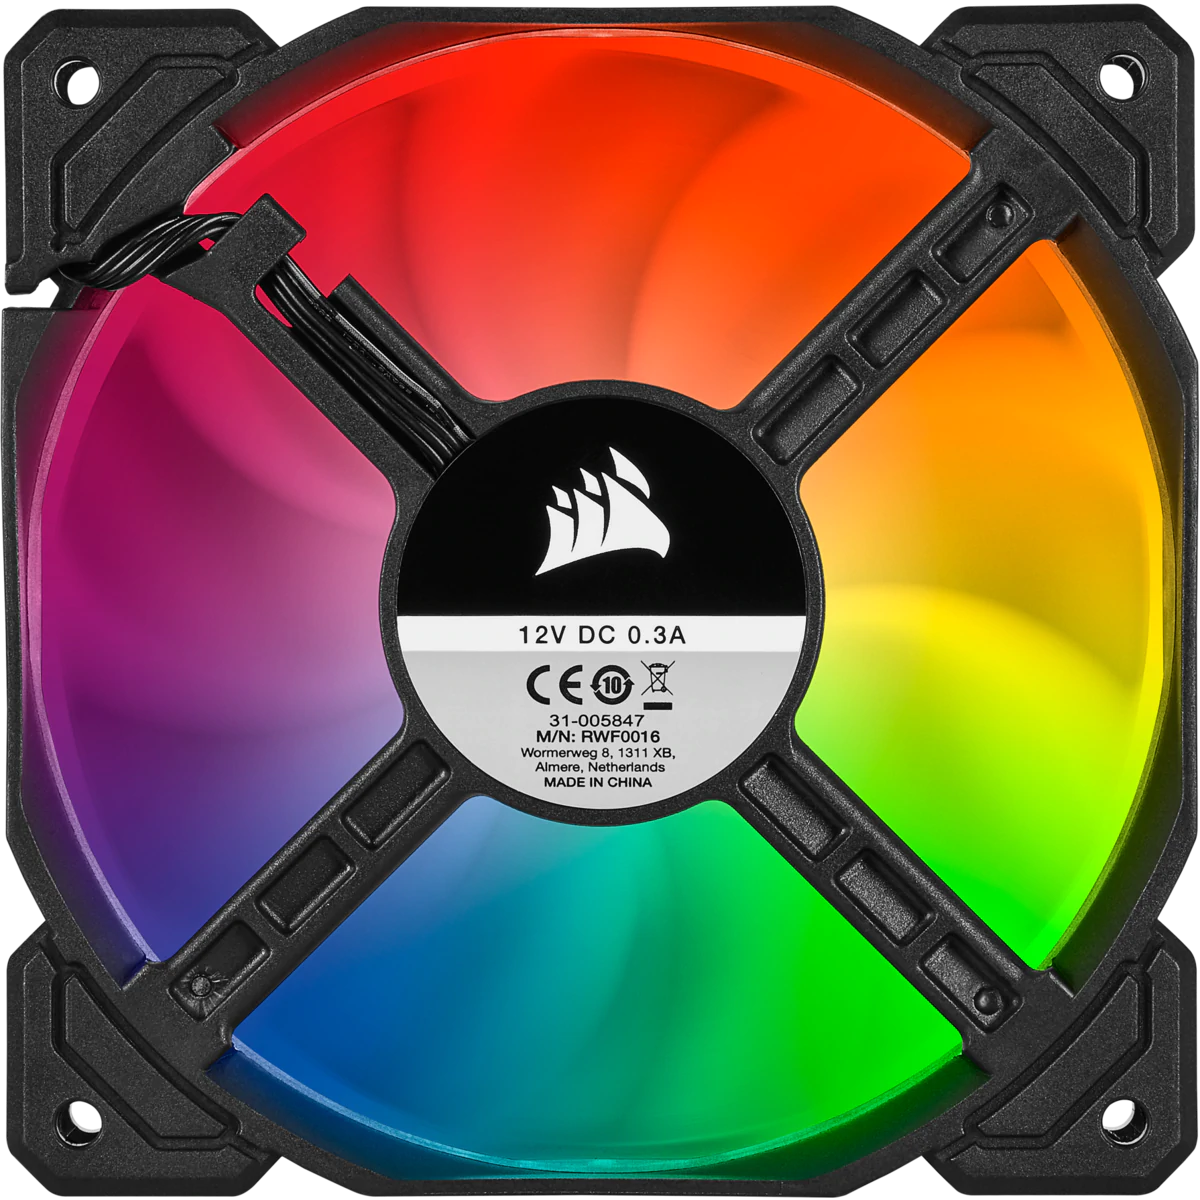 Corsair iCUE SP120 RGB Pro Performance with 120mm Triple Fan Kit and Lighting Node CORE From Tps Technologies